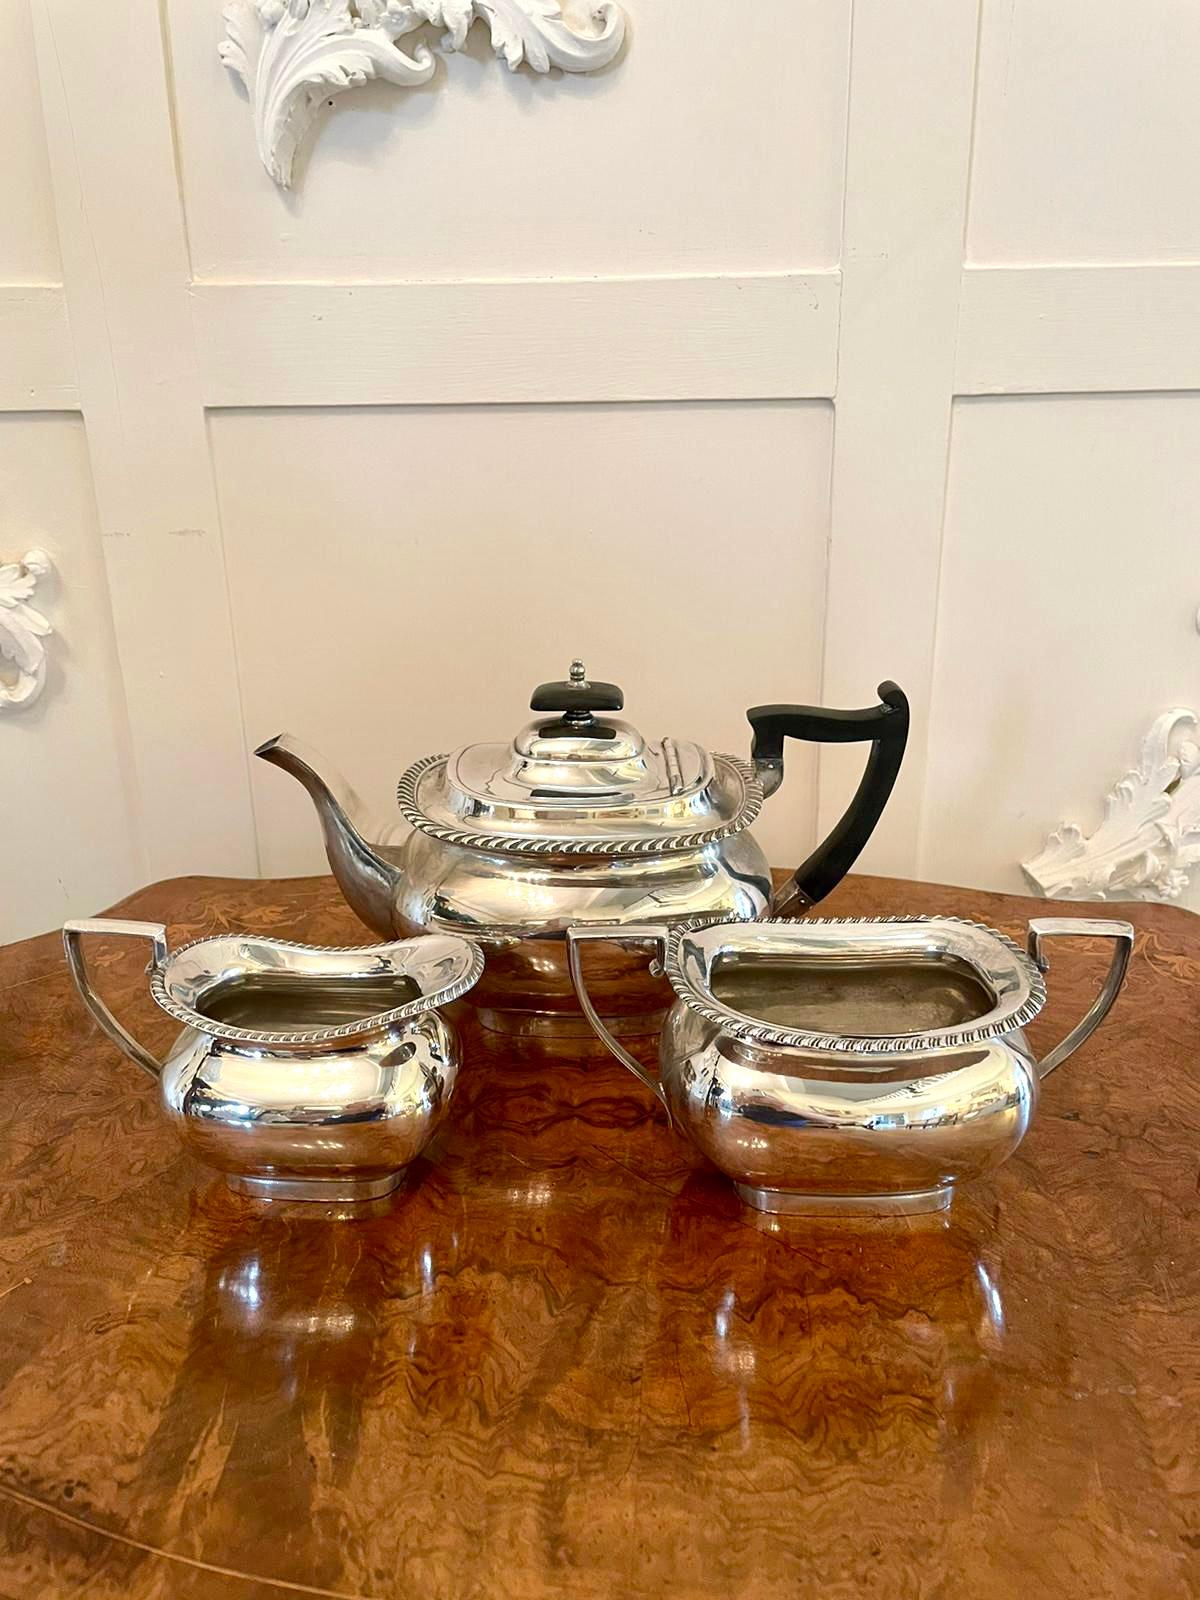 Antique Edwardian Three Piece Silver Plated Tea Set by Walker & Hall For Sale 2